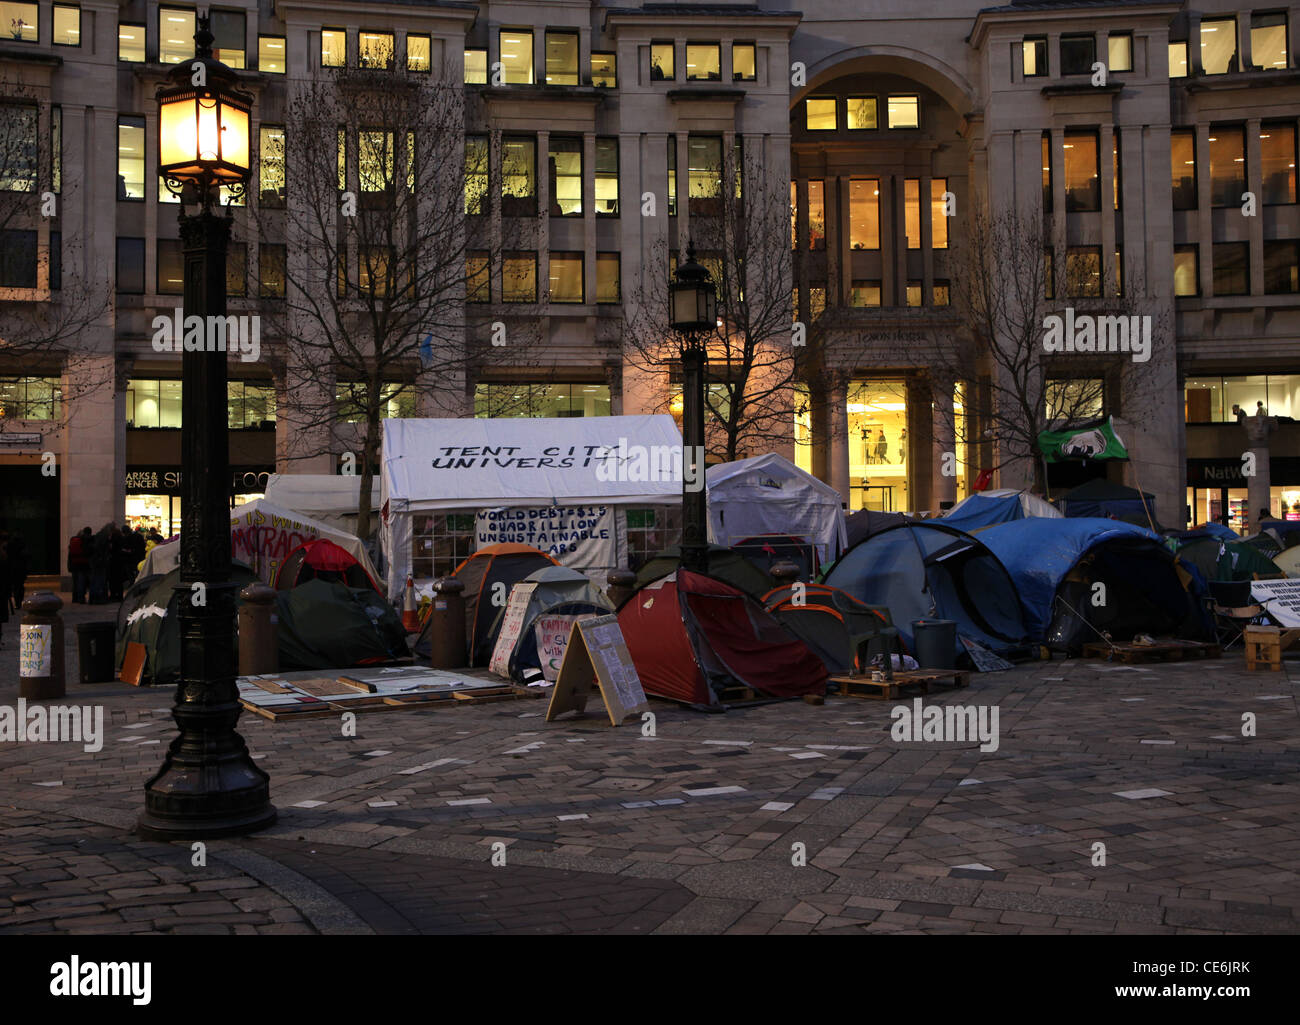 Tent City Protest Camp outside St Paul's, London in the evening Stock Photo